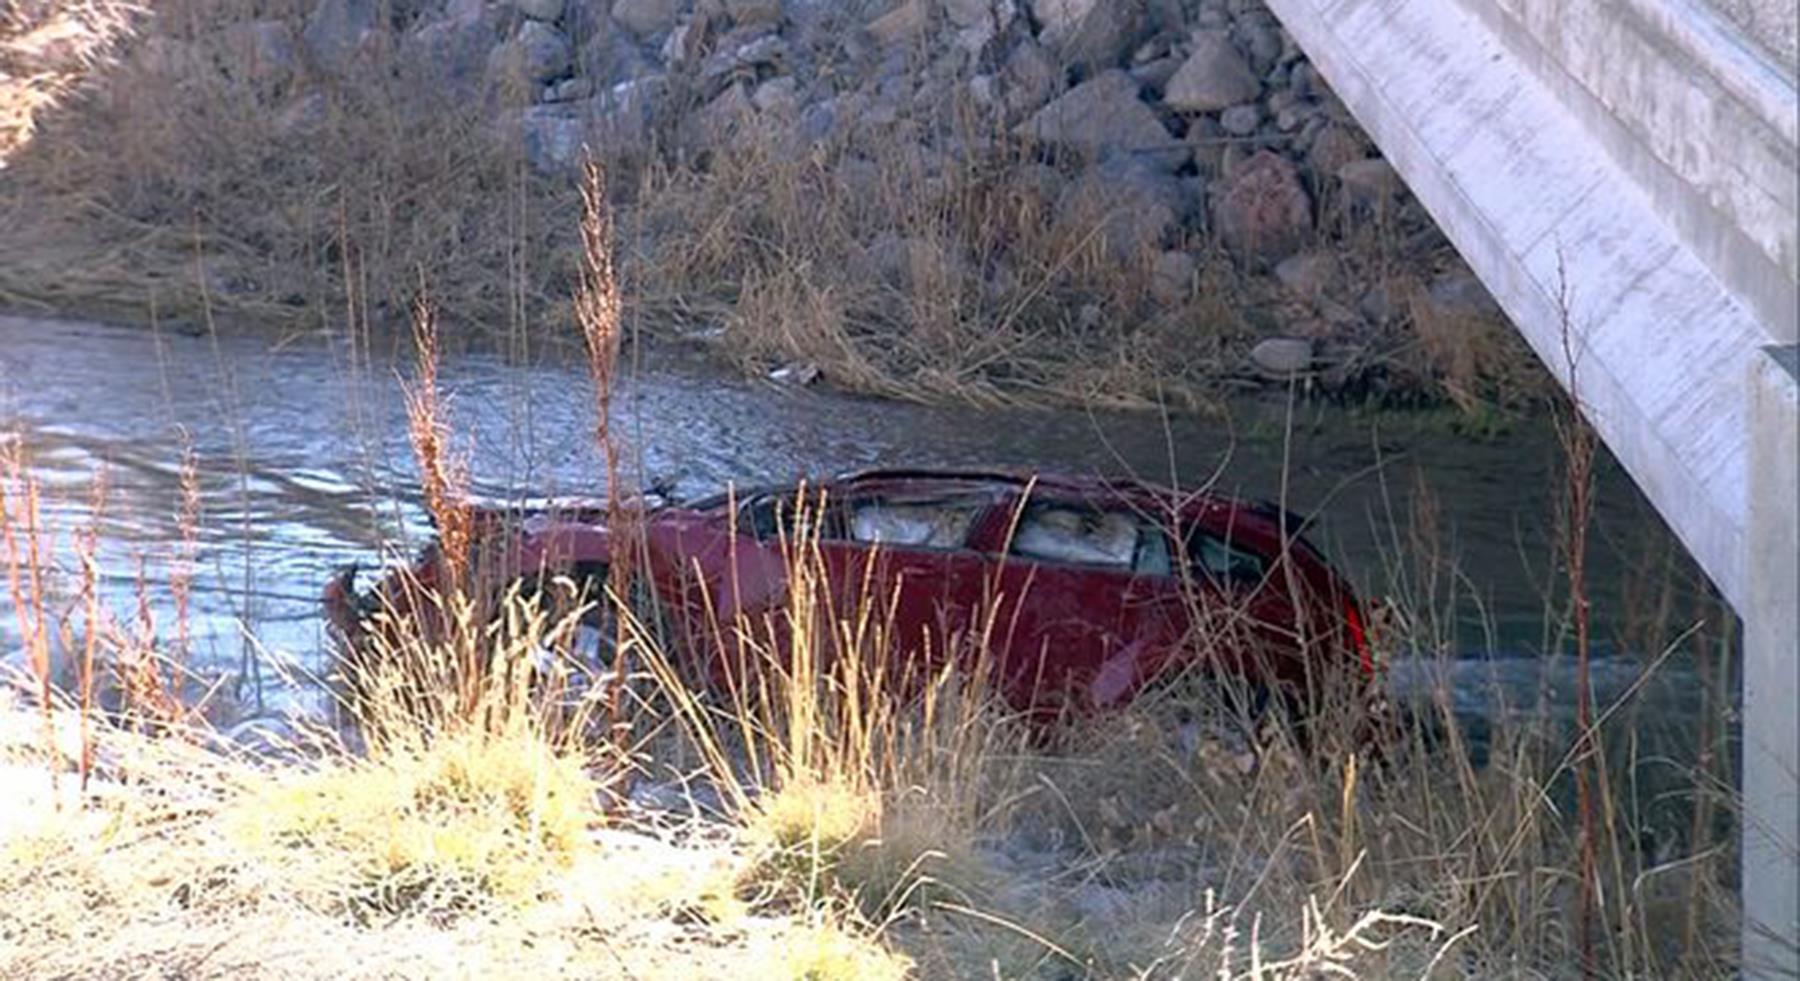 a-baby-girl-found-alive-in-river-14-hours-after-car-crash